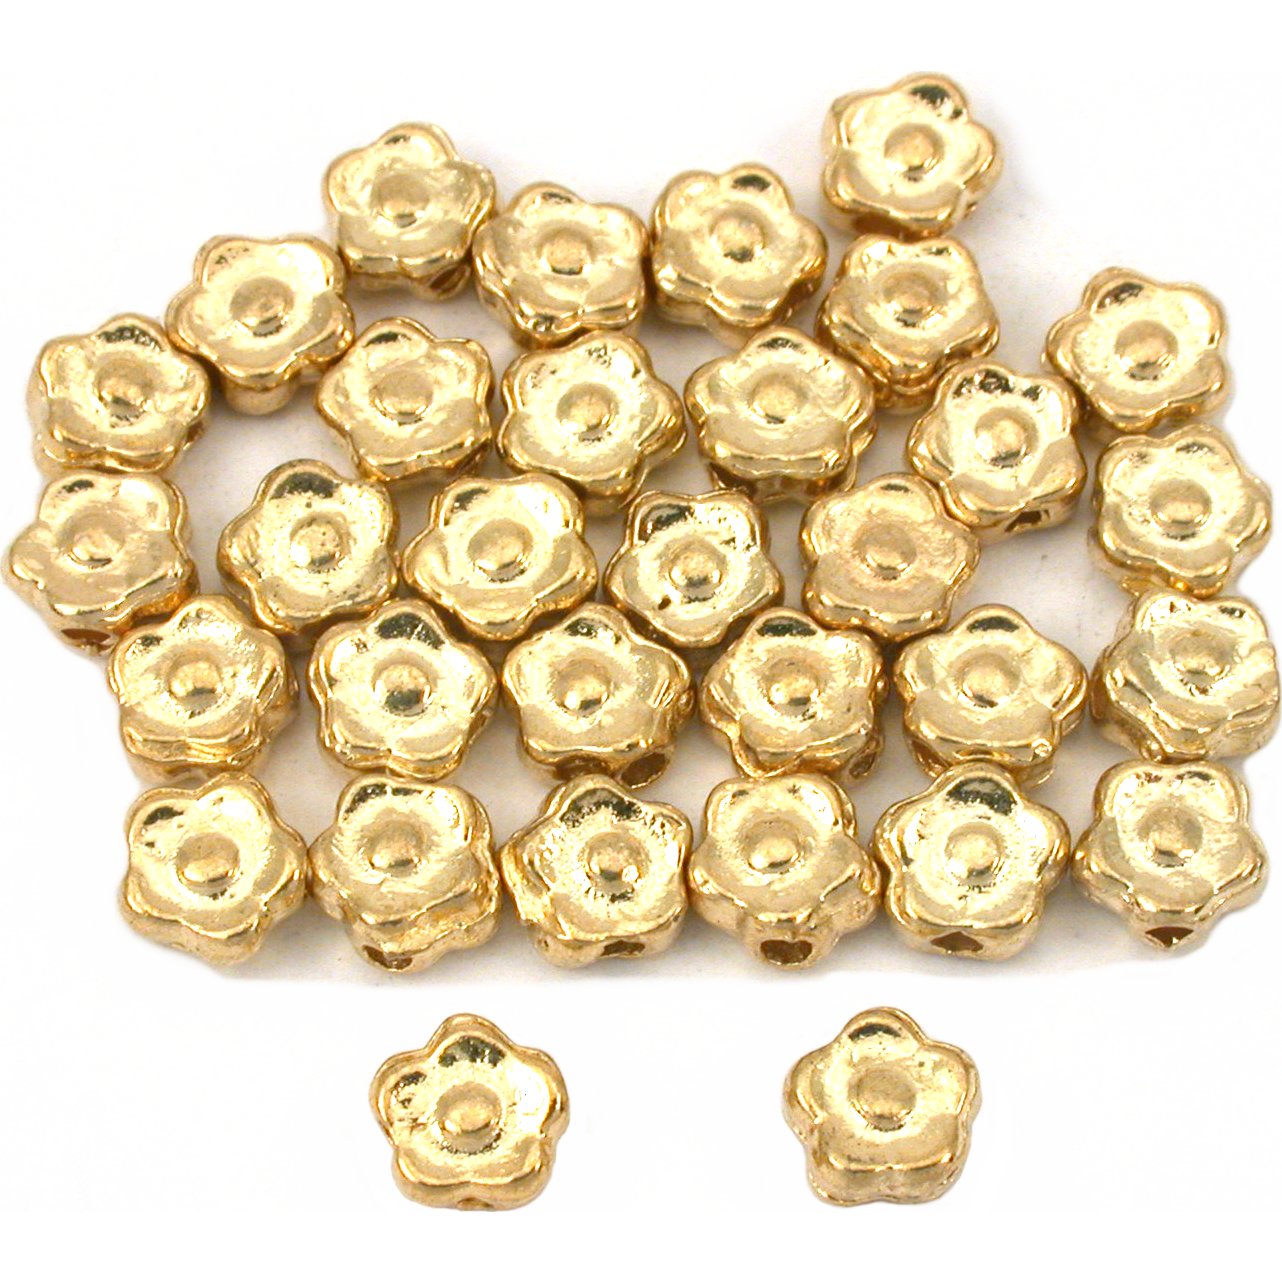 Bali Flower Gold Plated Beads 6.5mm 30Pcs Approx.